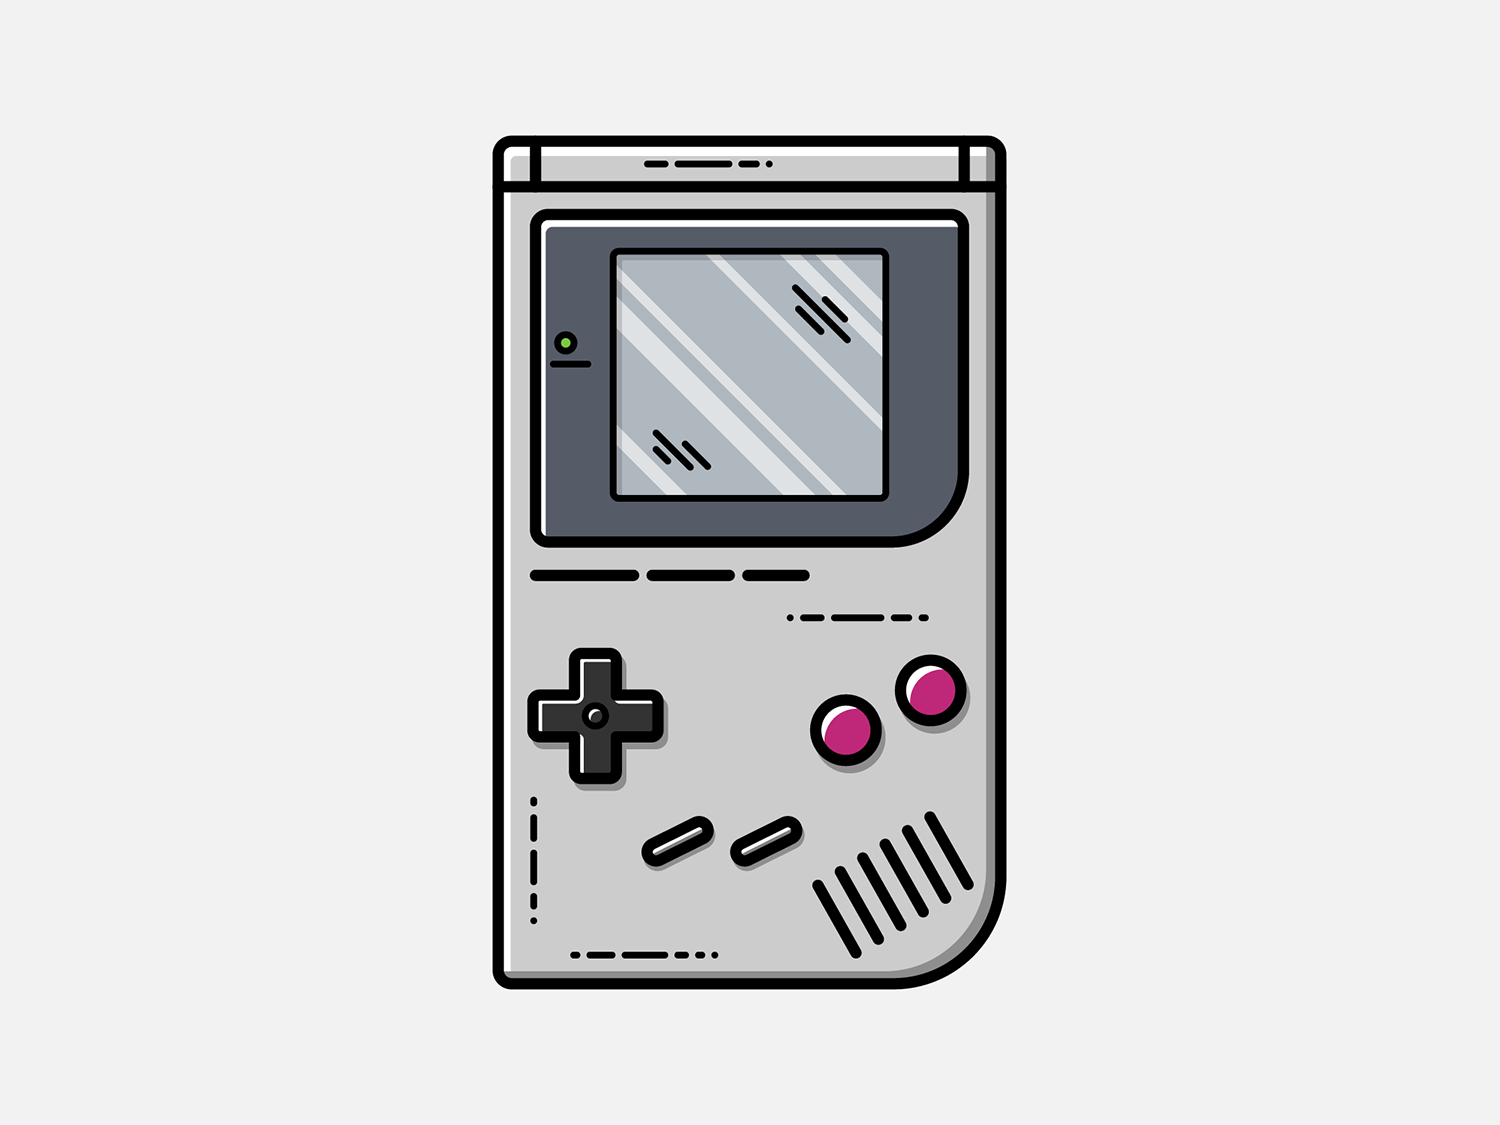 Game Boy Vector Illustration by Geoffrey Humbert on Dribbble